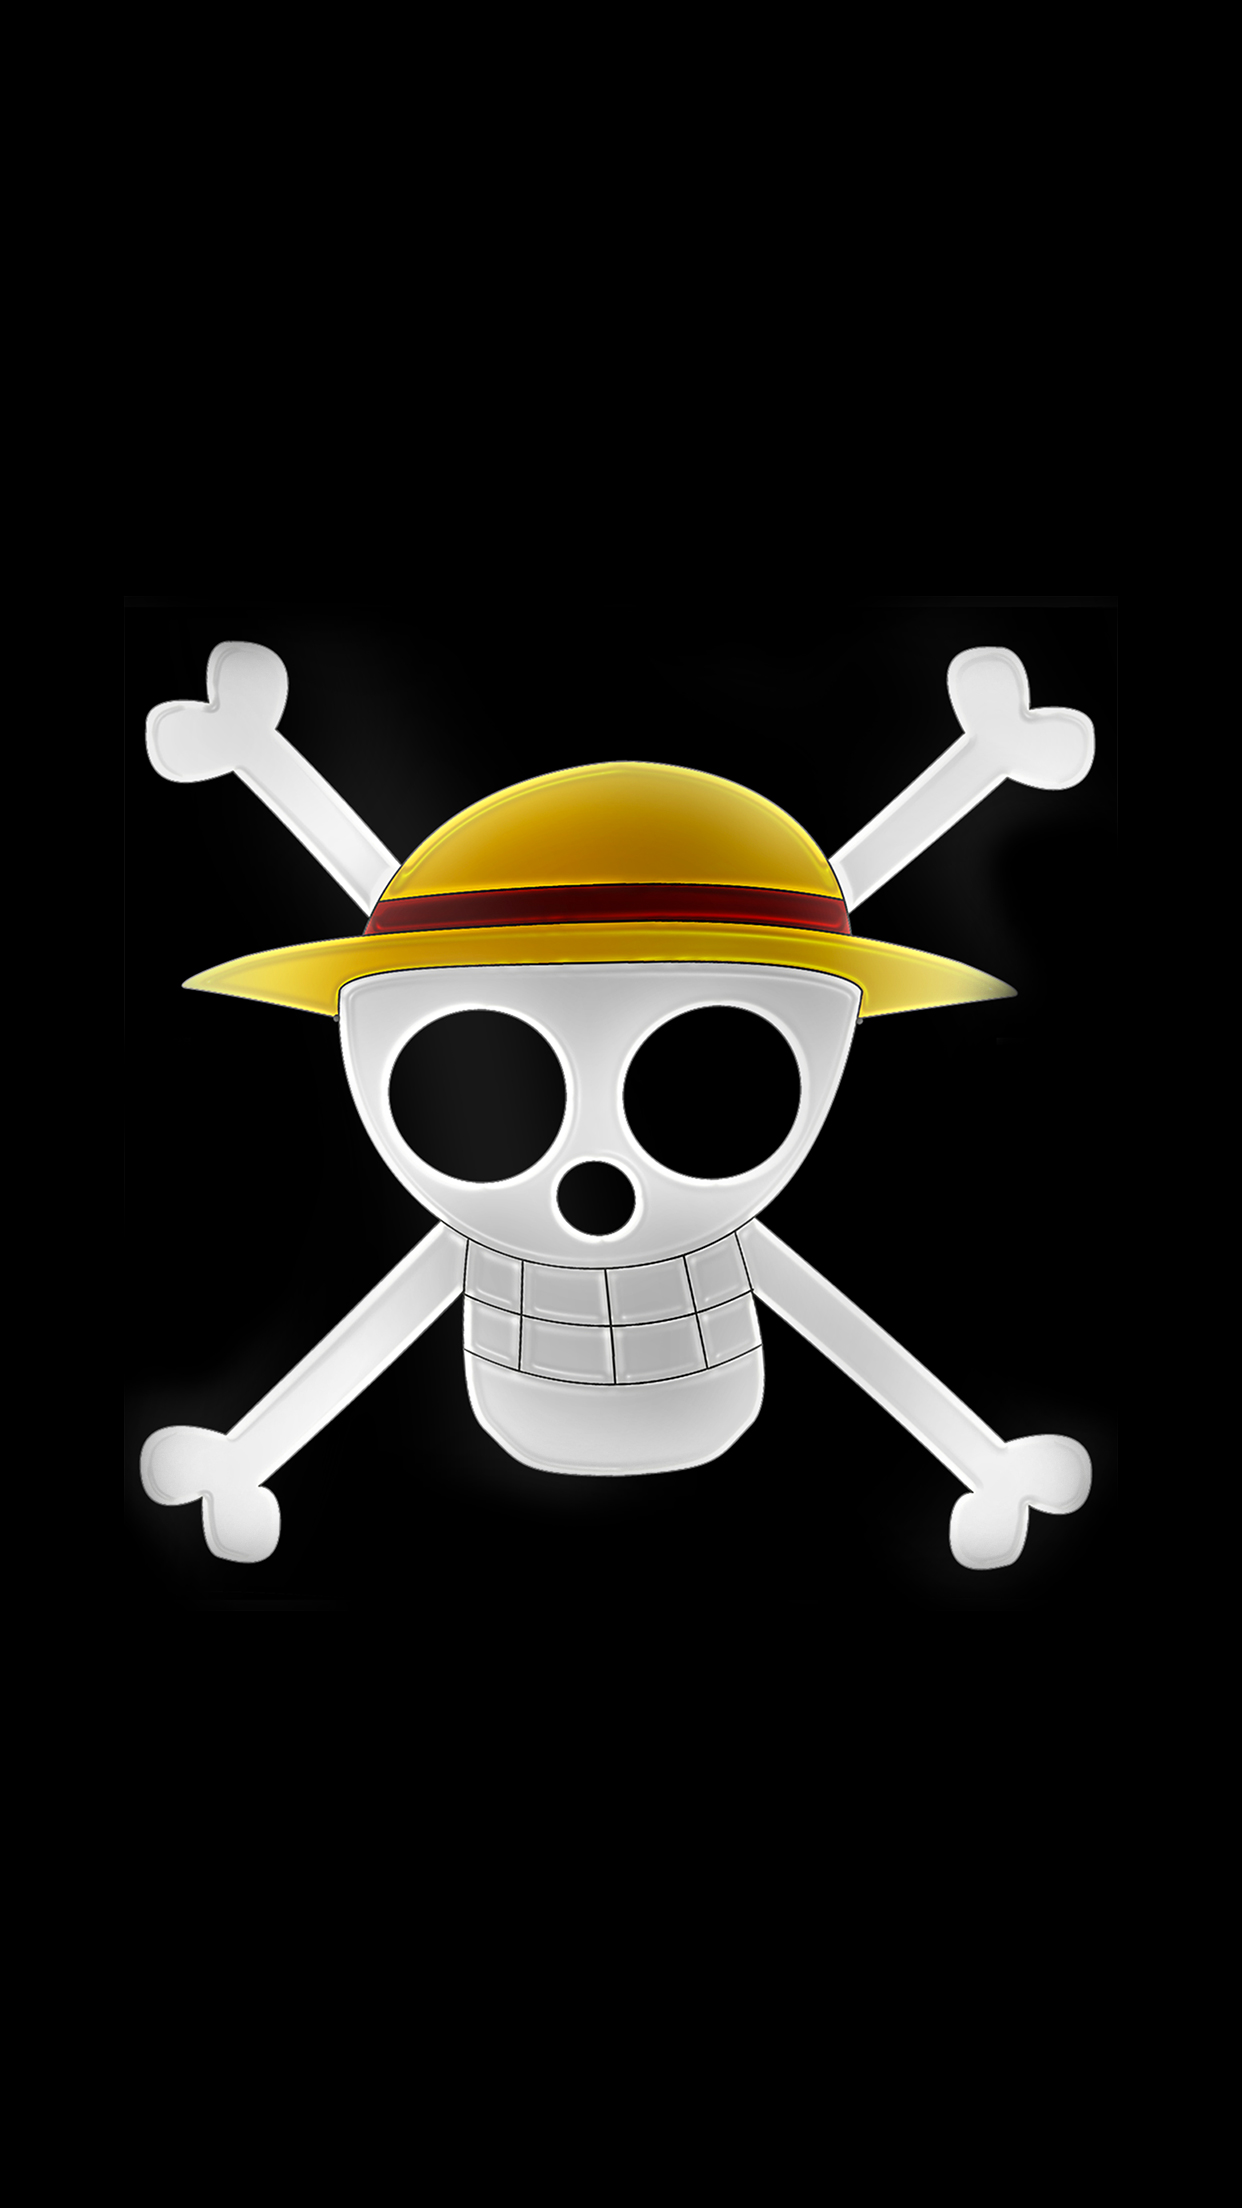 One Piece Logo iPhone 3Wallpapers Parallax Les 3 Wallpapers iPhone du